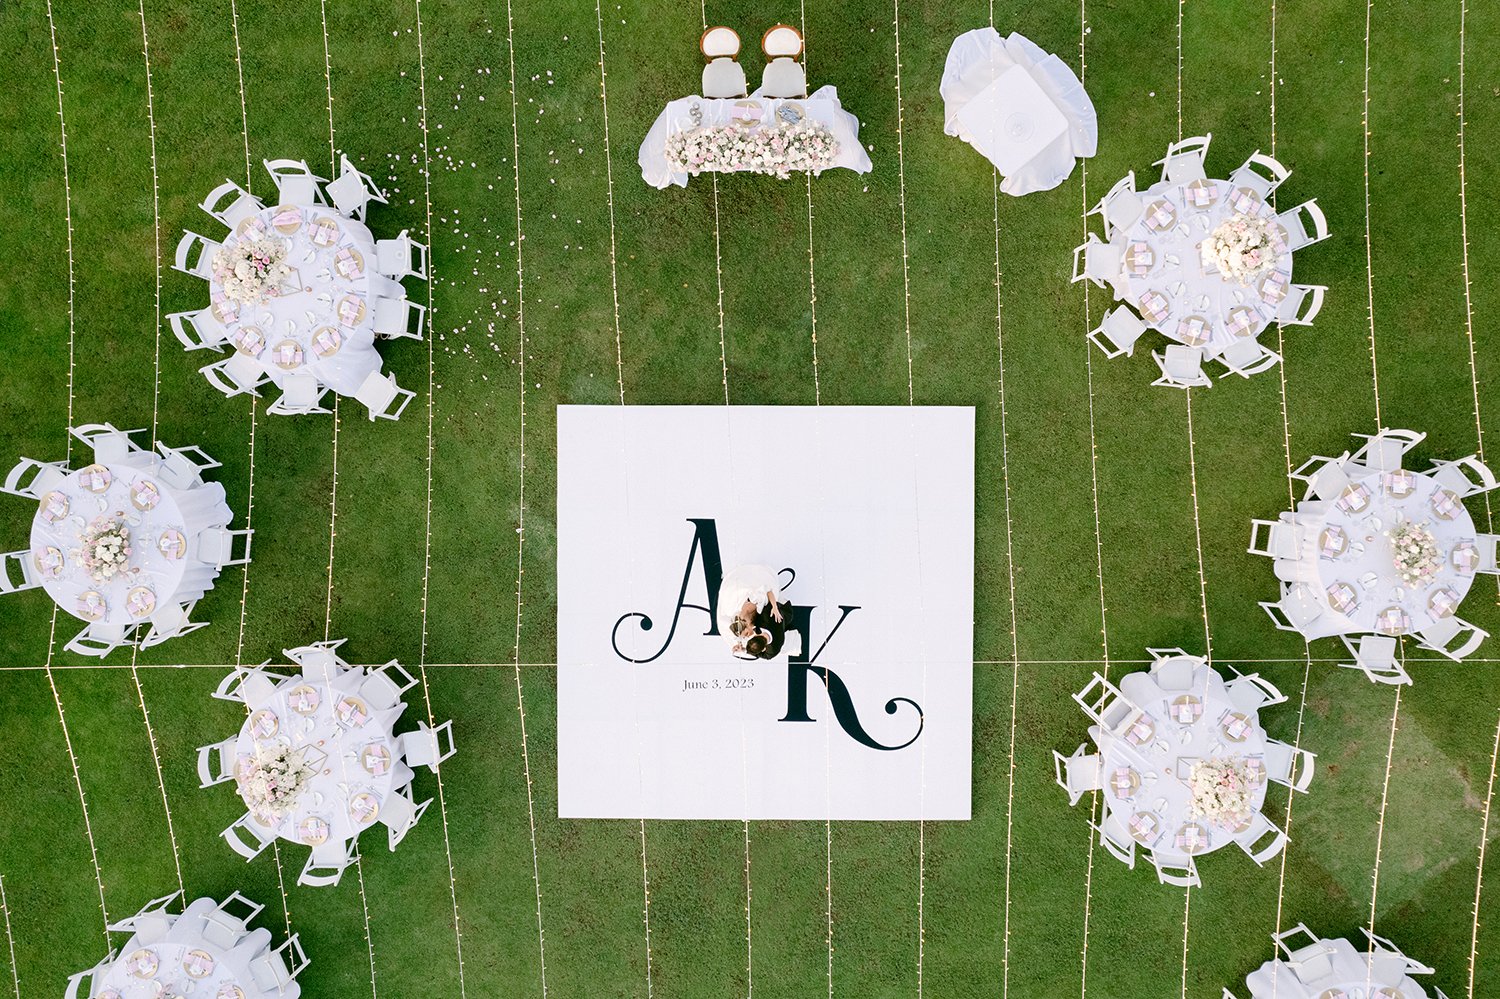 43 personalized wedding dance floor with bride and groom dancing over it with reception decoration all around over grass at Dreams Riviera Cancun.JPG